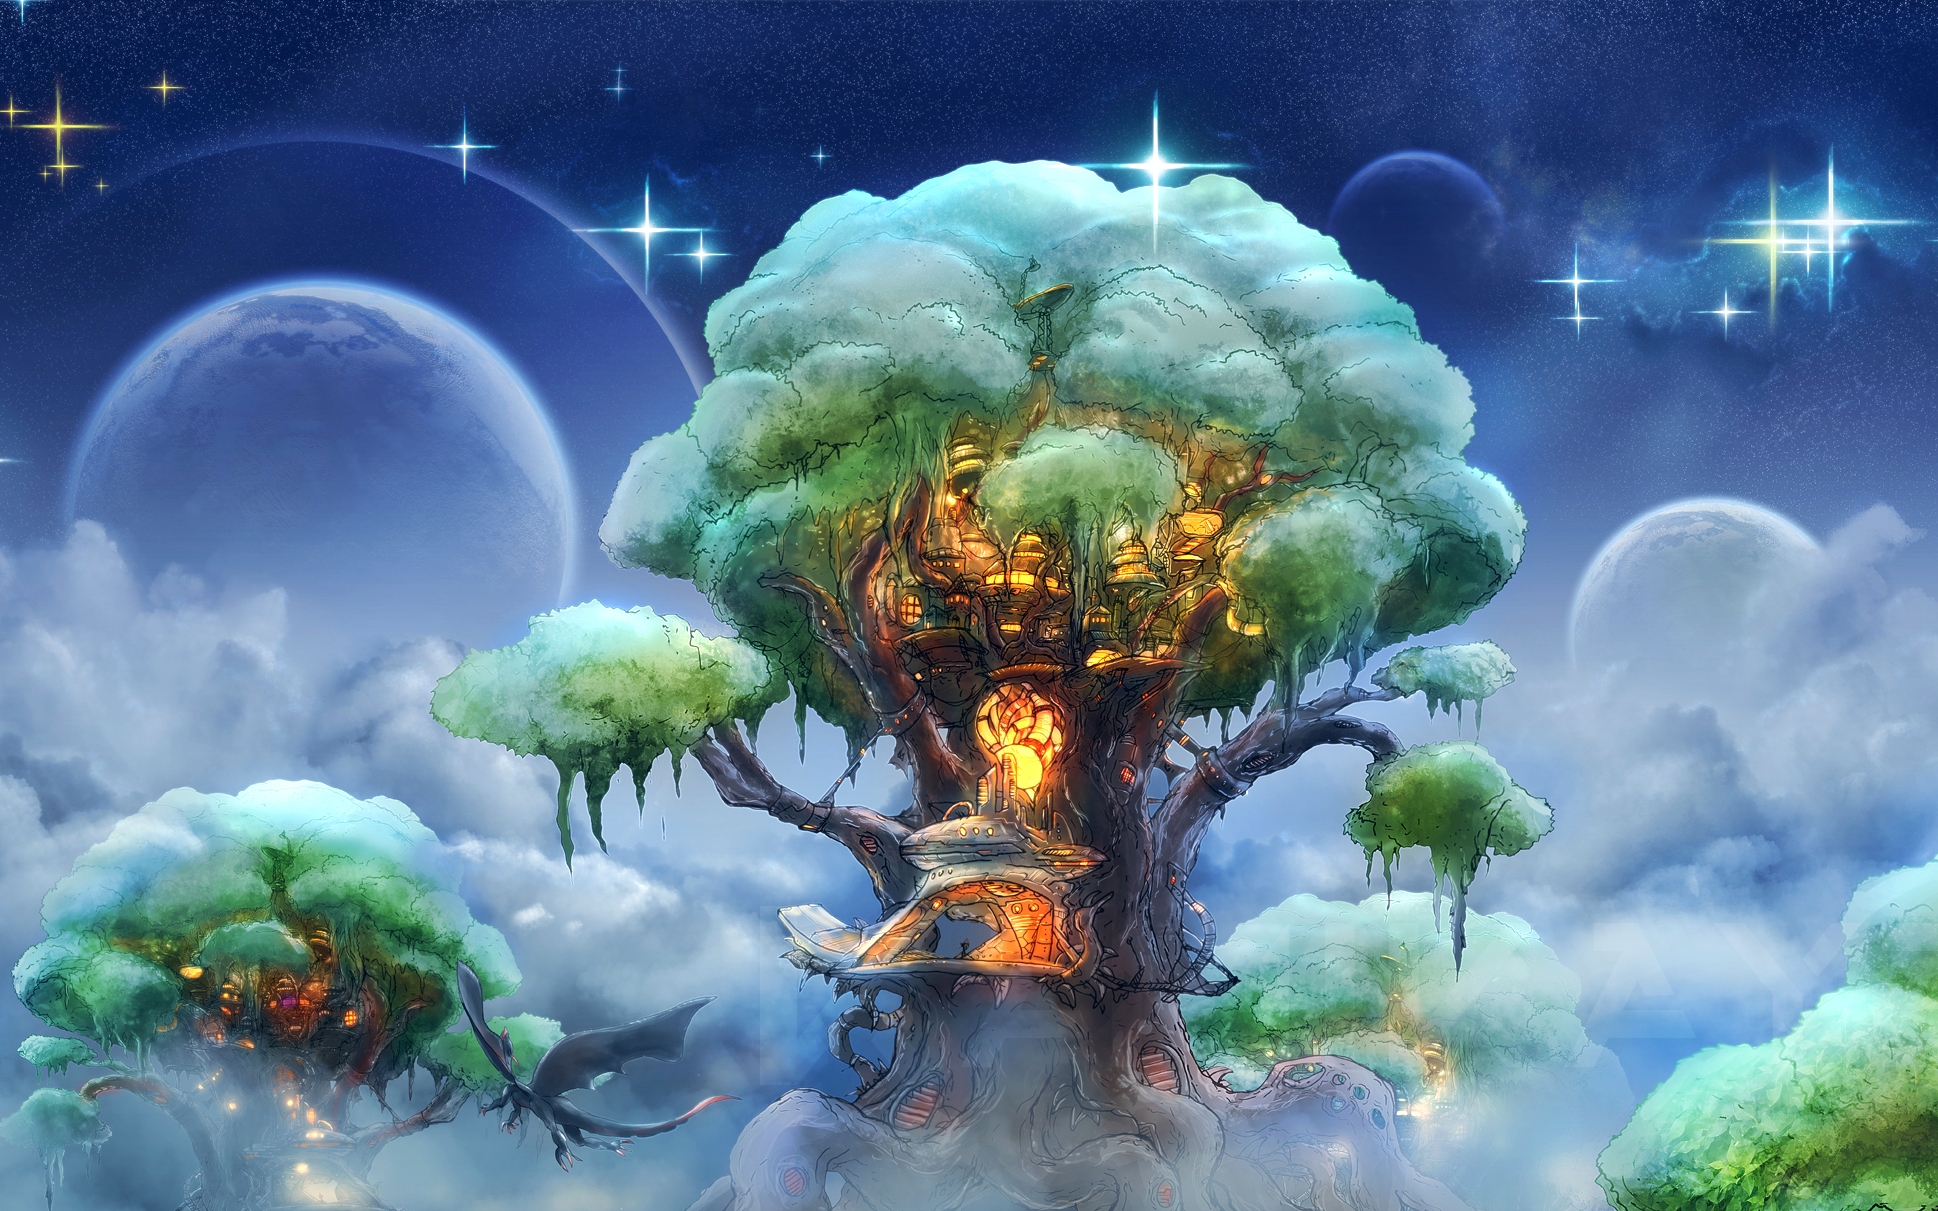 Free Download Fantasy Art House Landscapes Trees Sky Stars Clouds Islands Wallpaper 1938x1211 For Your Desktop Mobile Tablet Explore 47 Tree House Wallpaper Tree Wallpaper For Walls Tree House